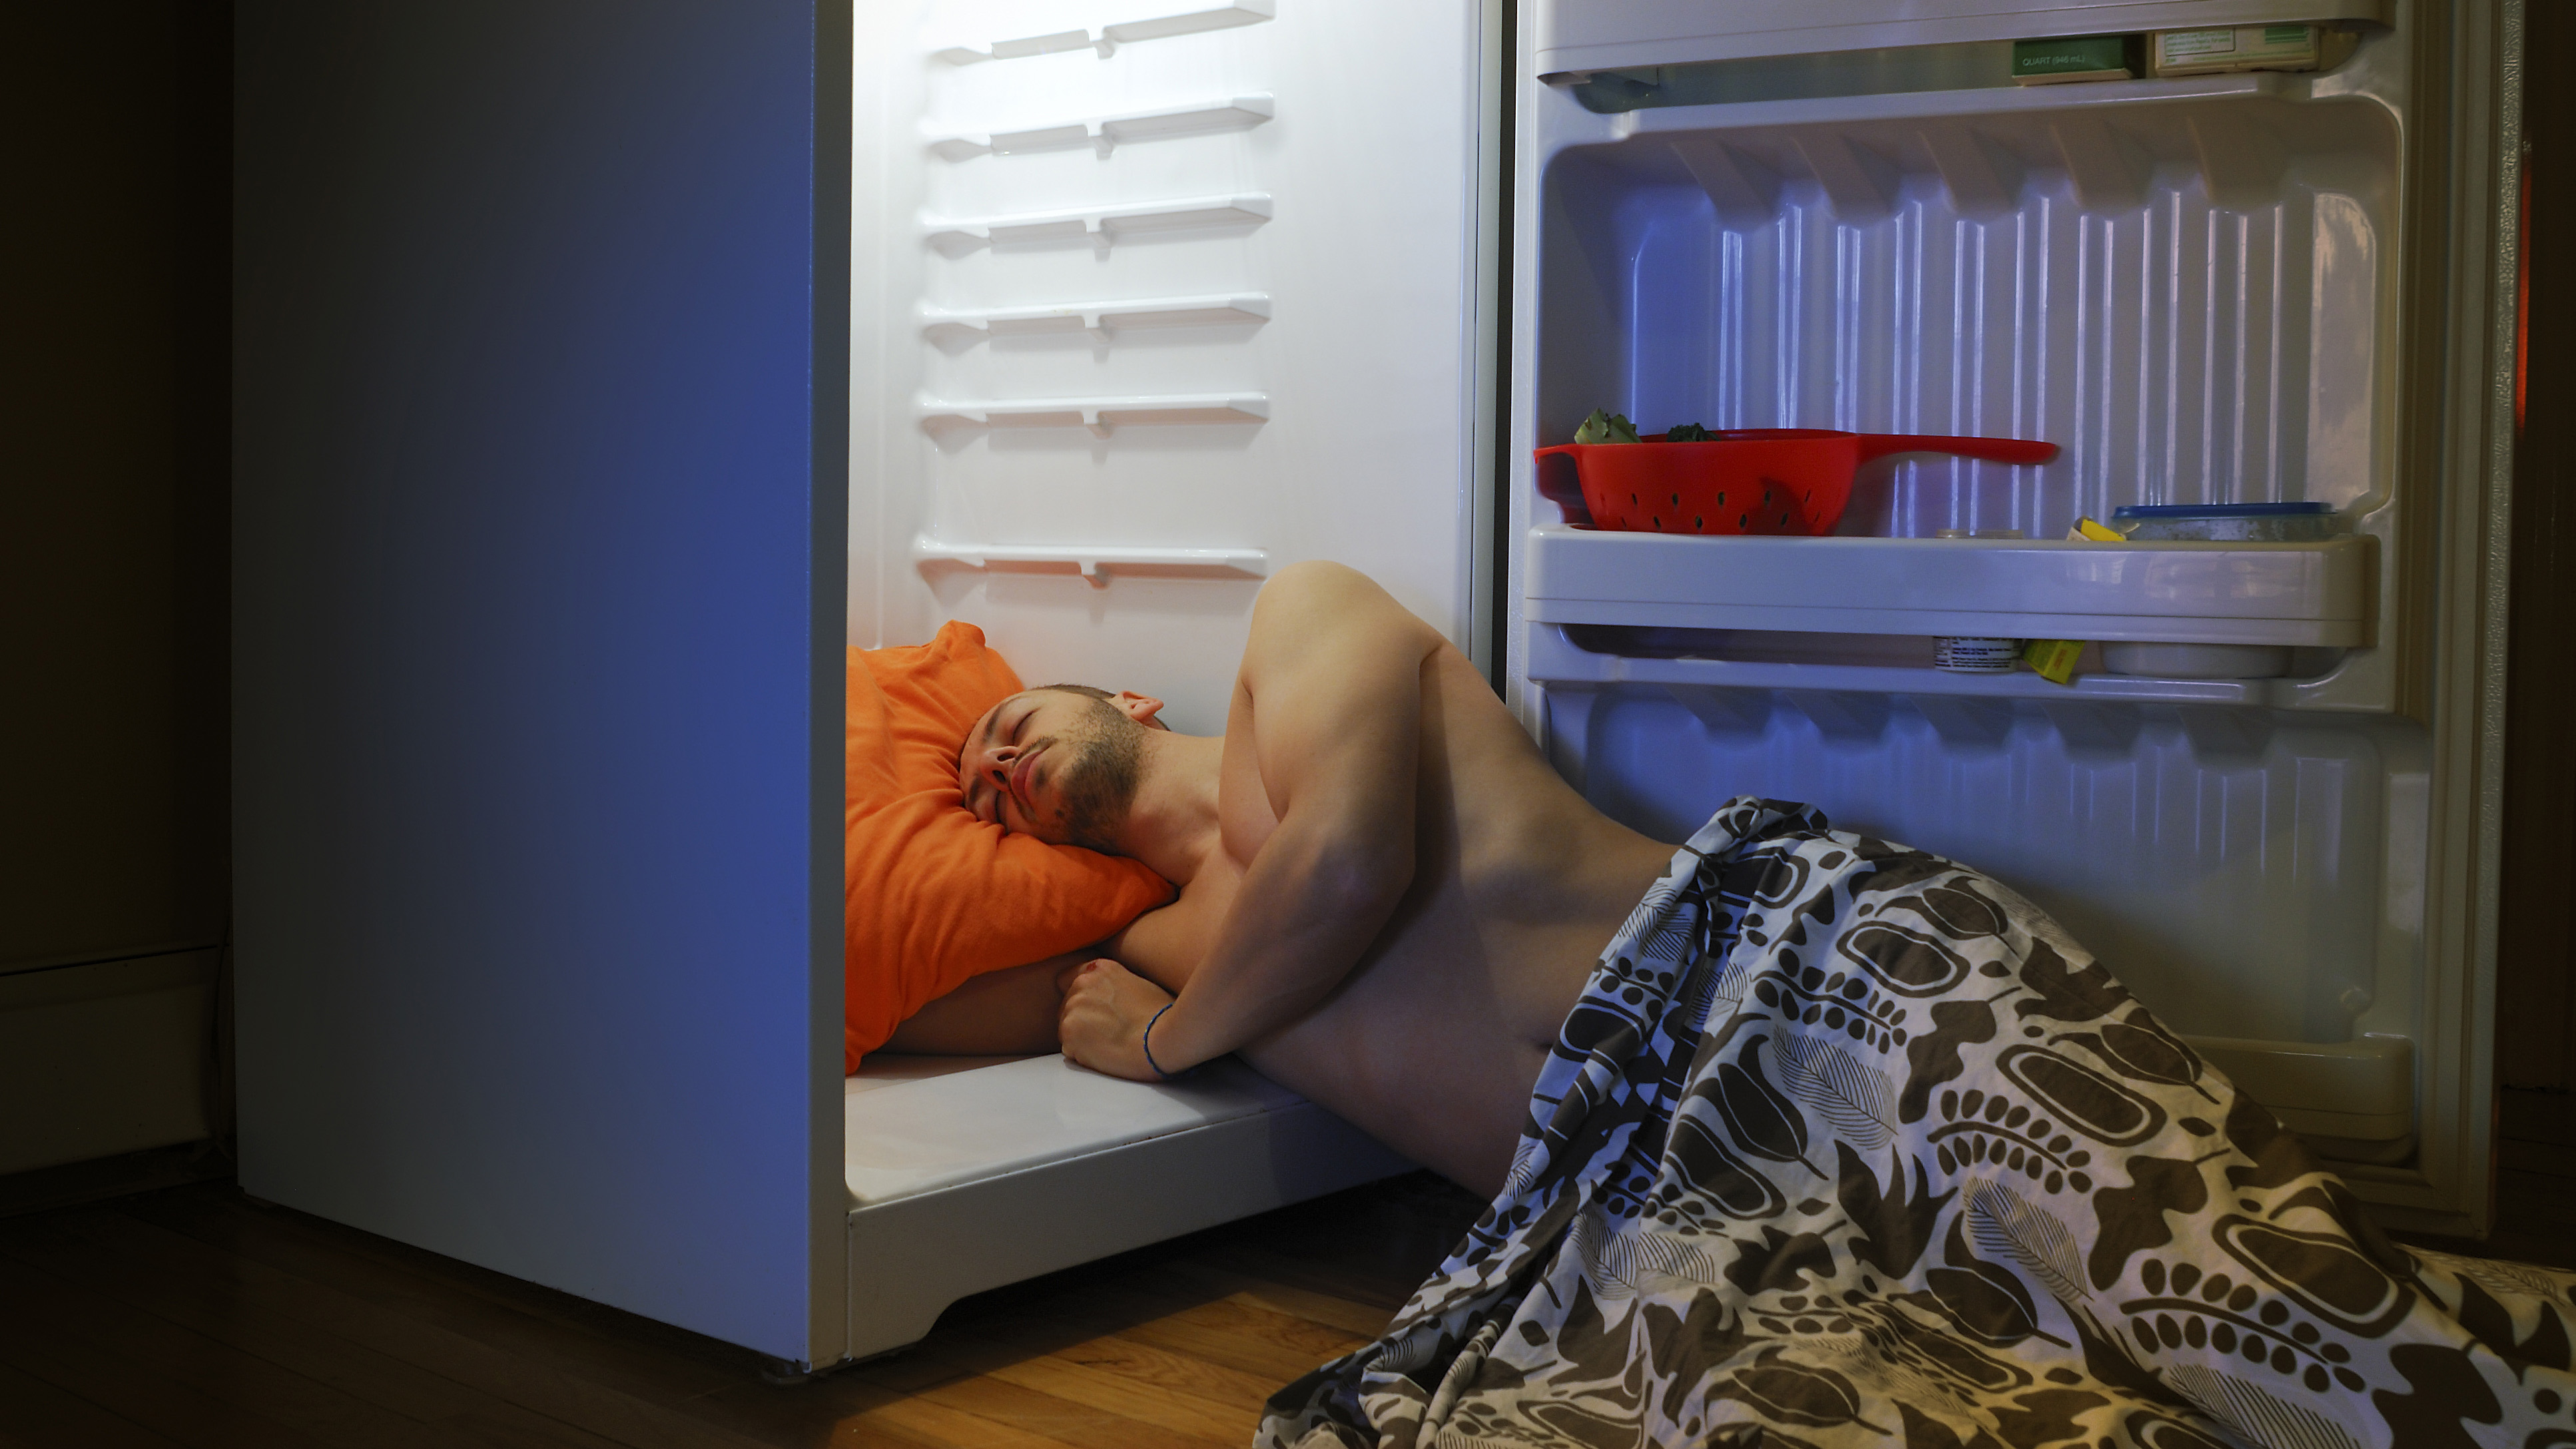 A man sleeps next to an open fridge door to stay cool in hot weather